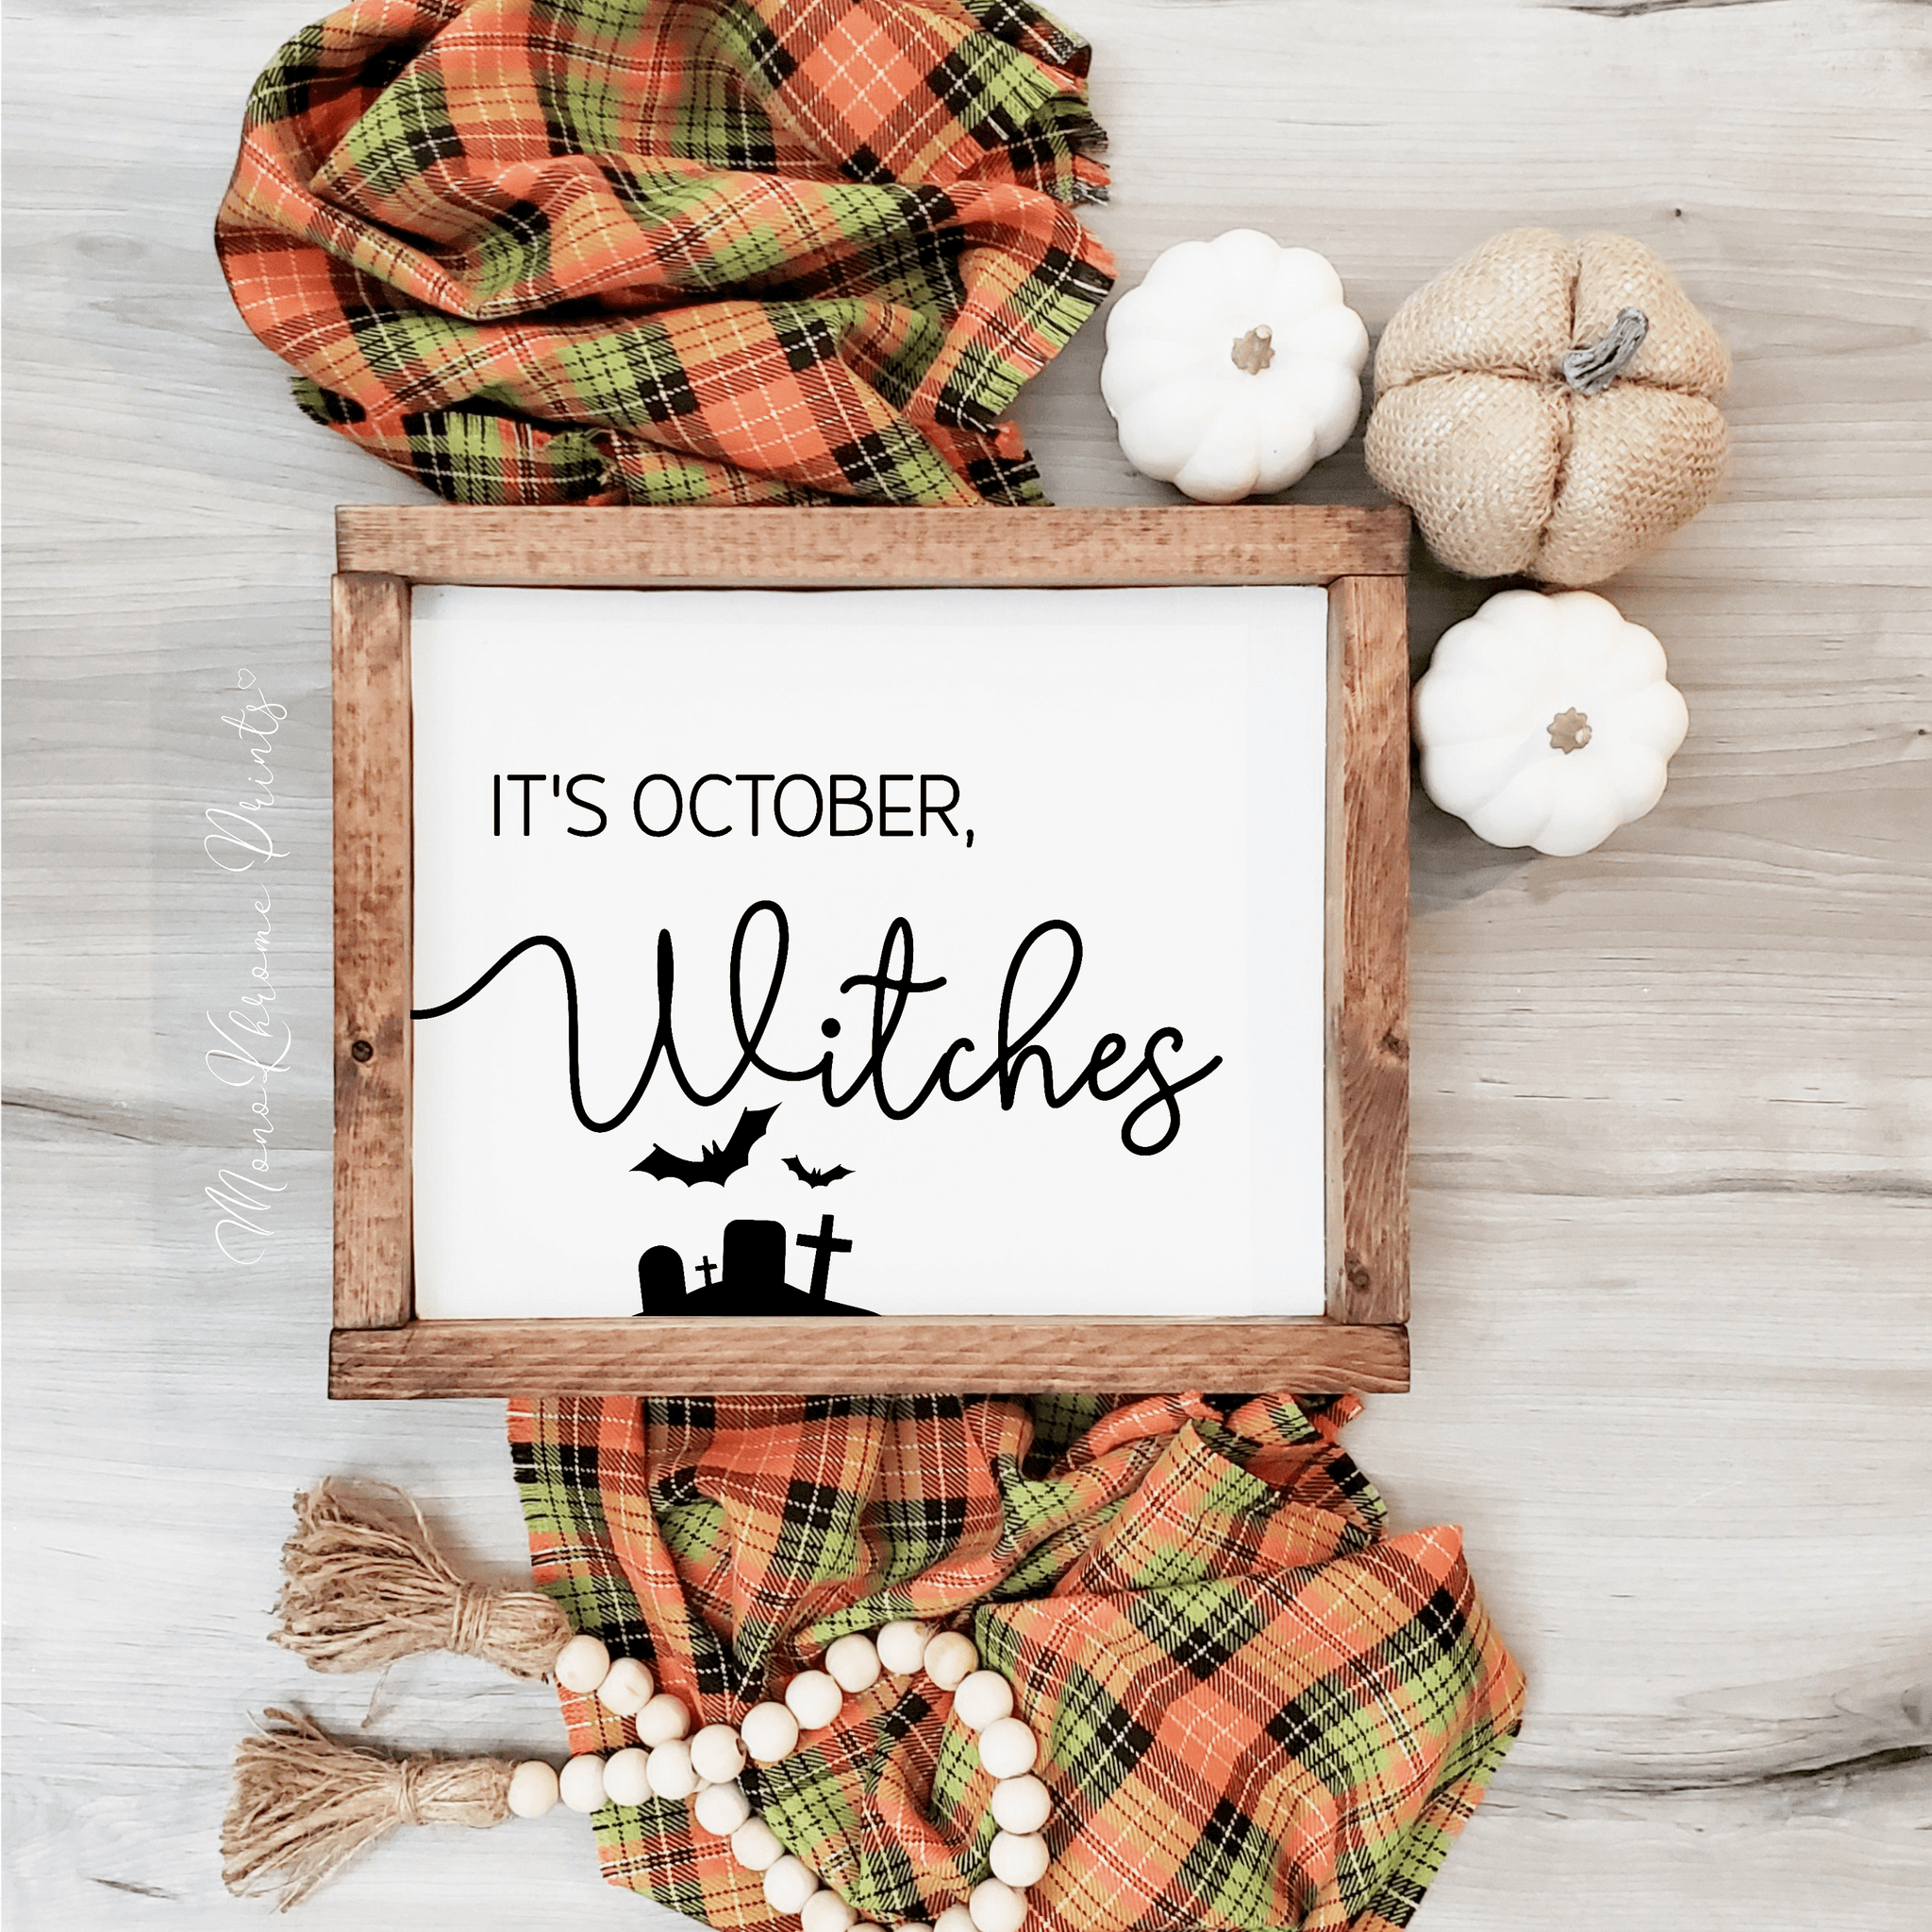 October wishes - Affiche décorative